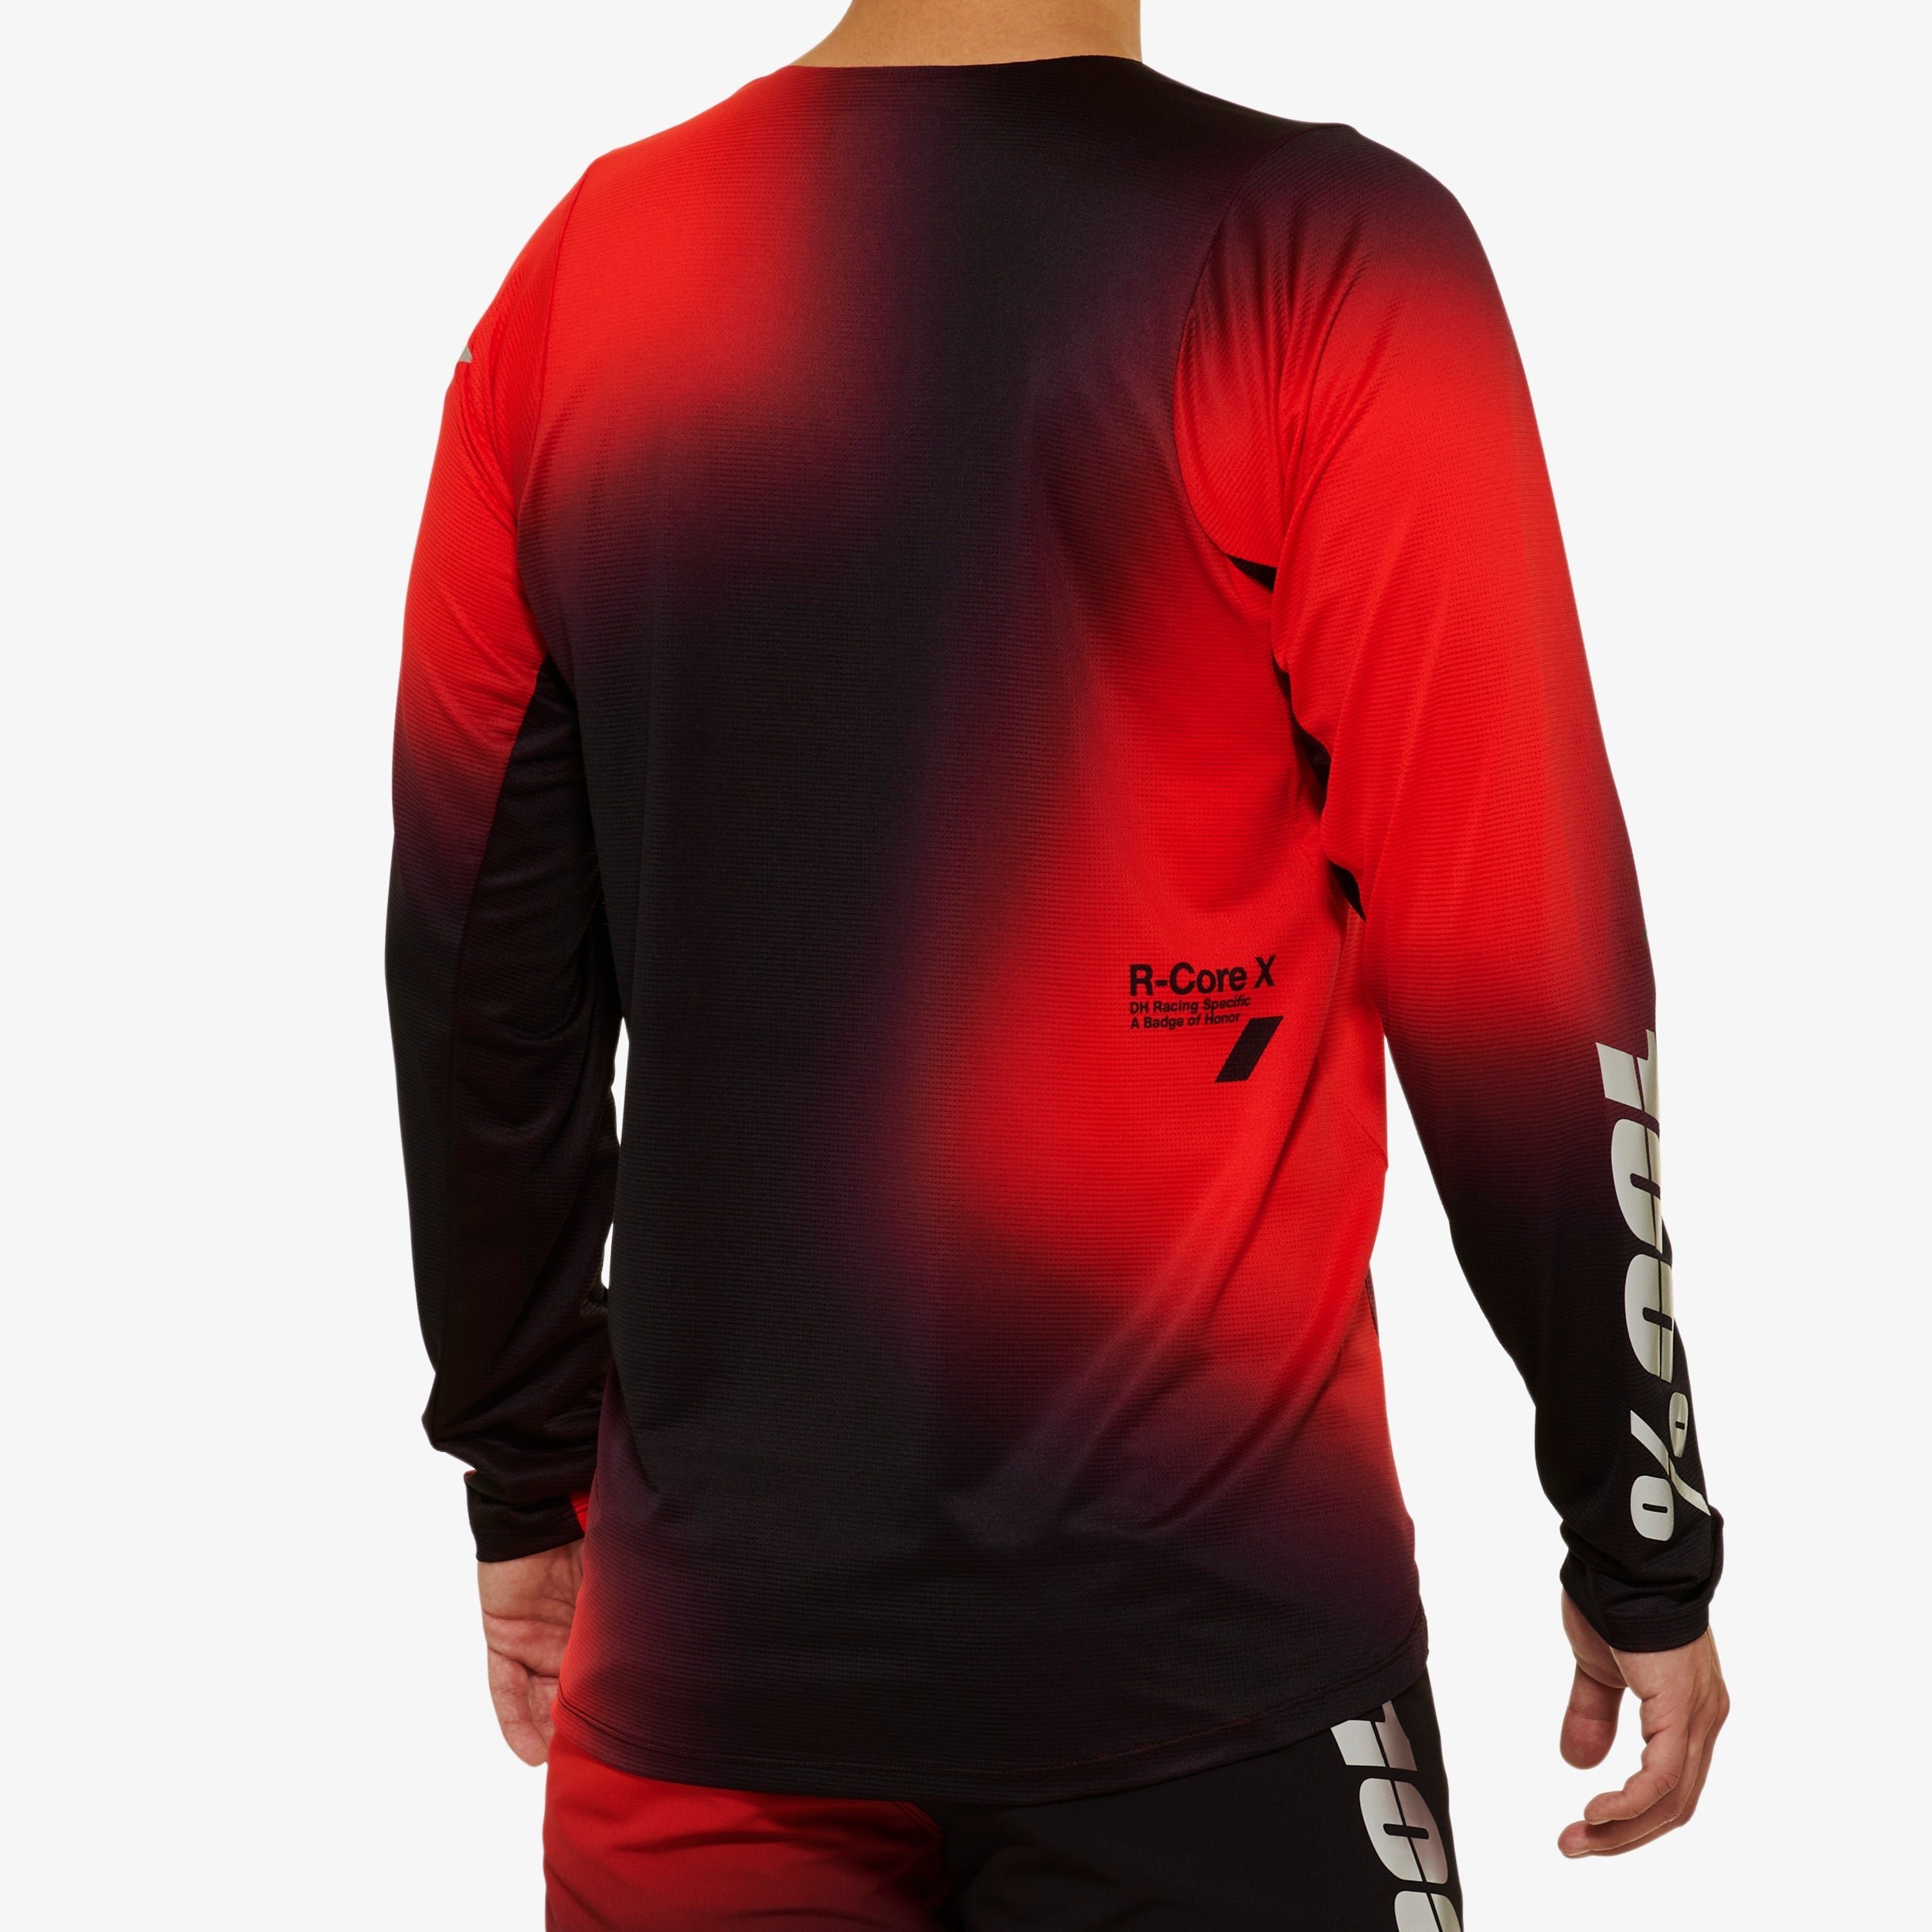 R-CORE X LE Long Sleeve Jersey Black/Red